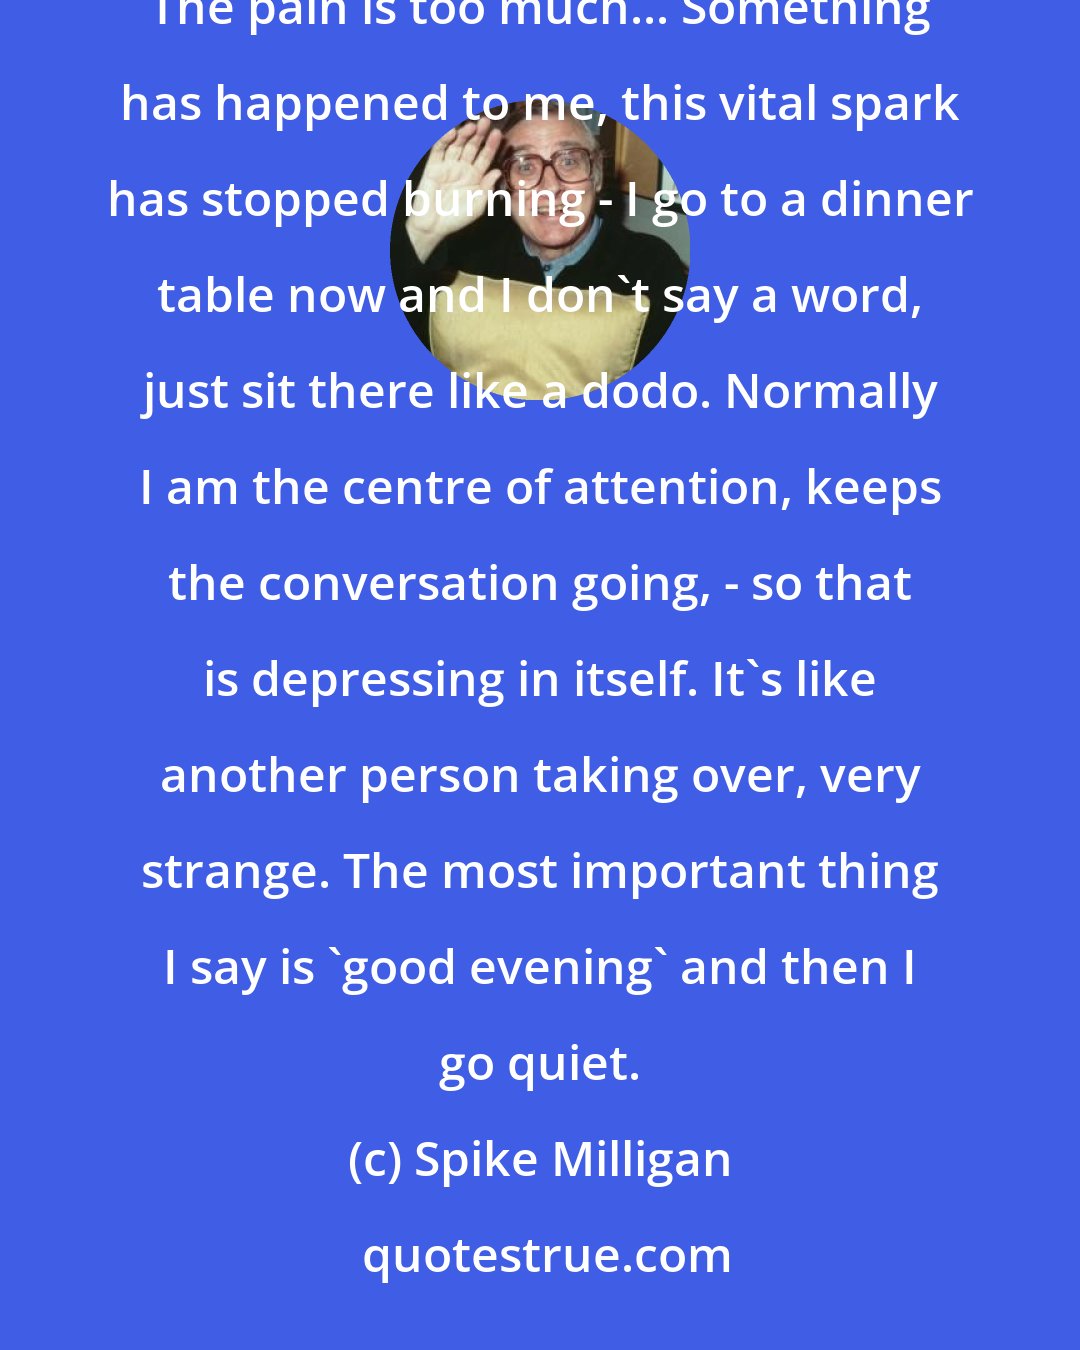 Spike Milligan: I have got so low that I have asked to be hospitalized and for deep narcosis (sleep). I cannot stand being awake. The pain is too much... Something has happened to me, this vital spark has stopped burning - I go to a dinner table now and I don't say a word, just sit there like a dodo. Normally I am the centre of attention, keeps the conversation going, - so that is depressing in itself. It's like another person taking over, very strange. The most important thing I say is 'good evening' and then I go quiet.